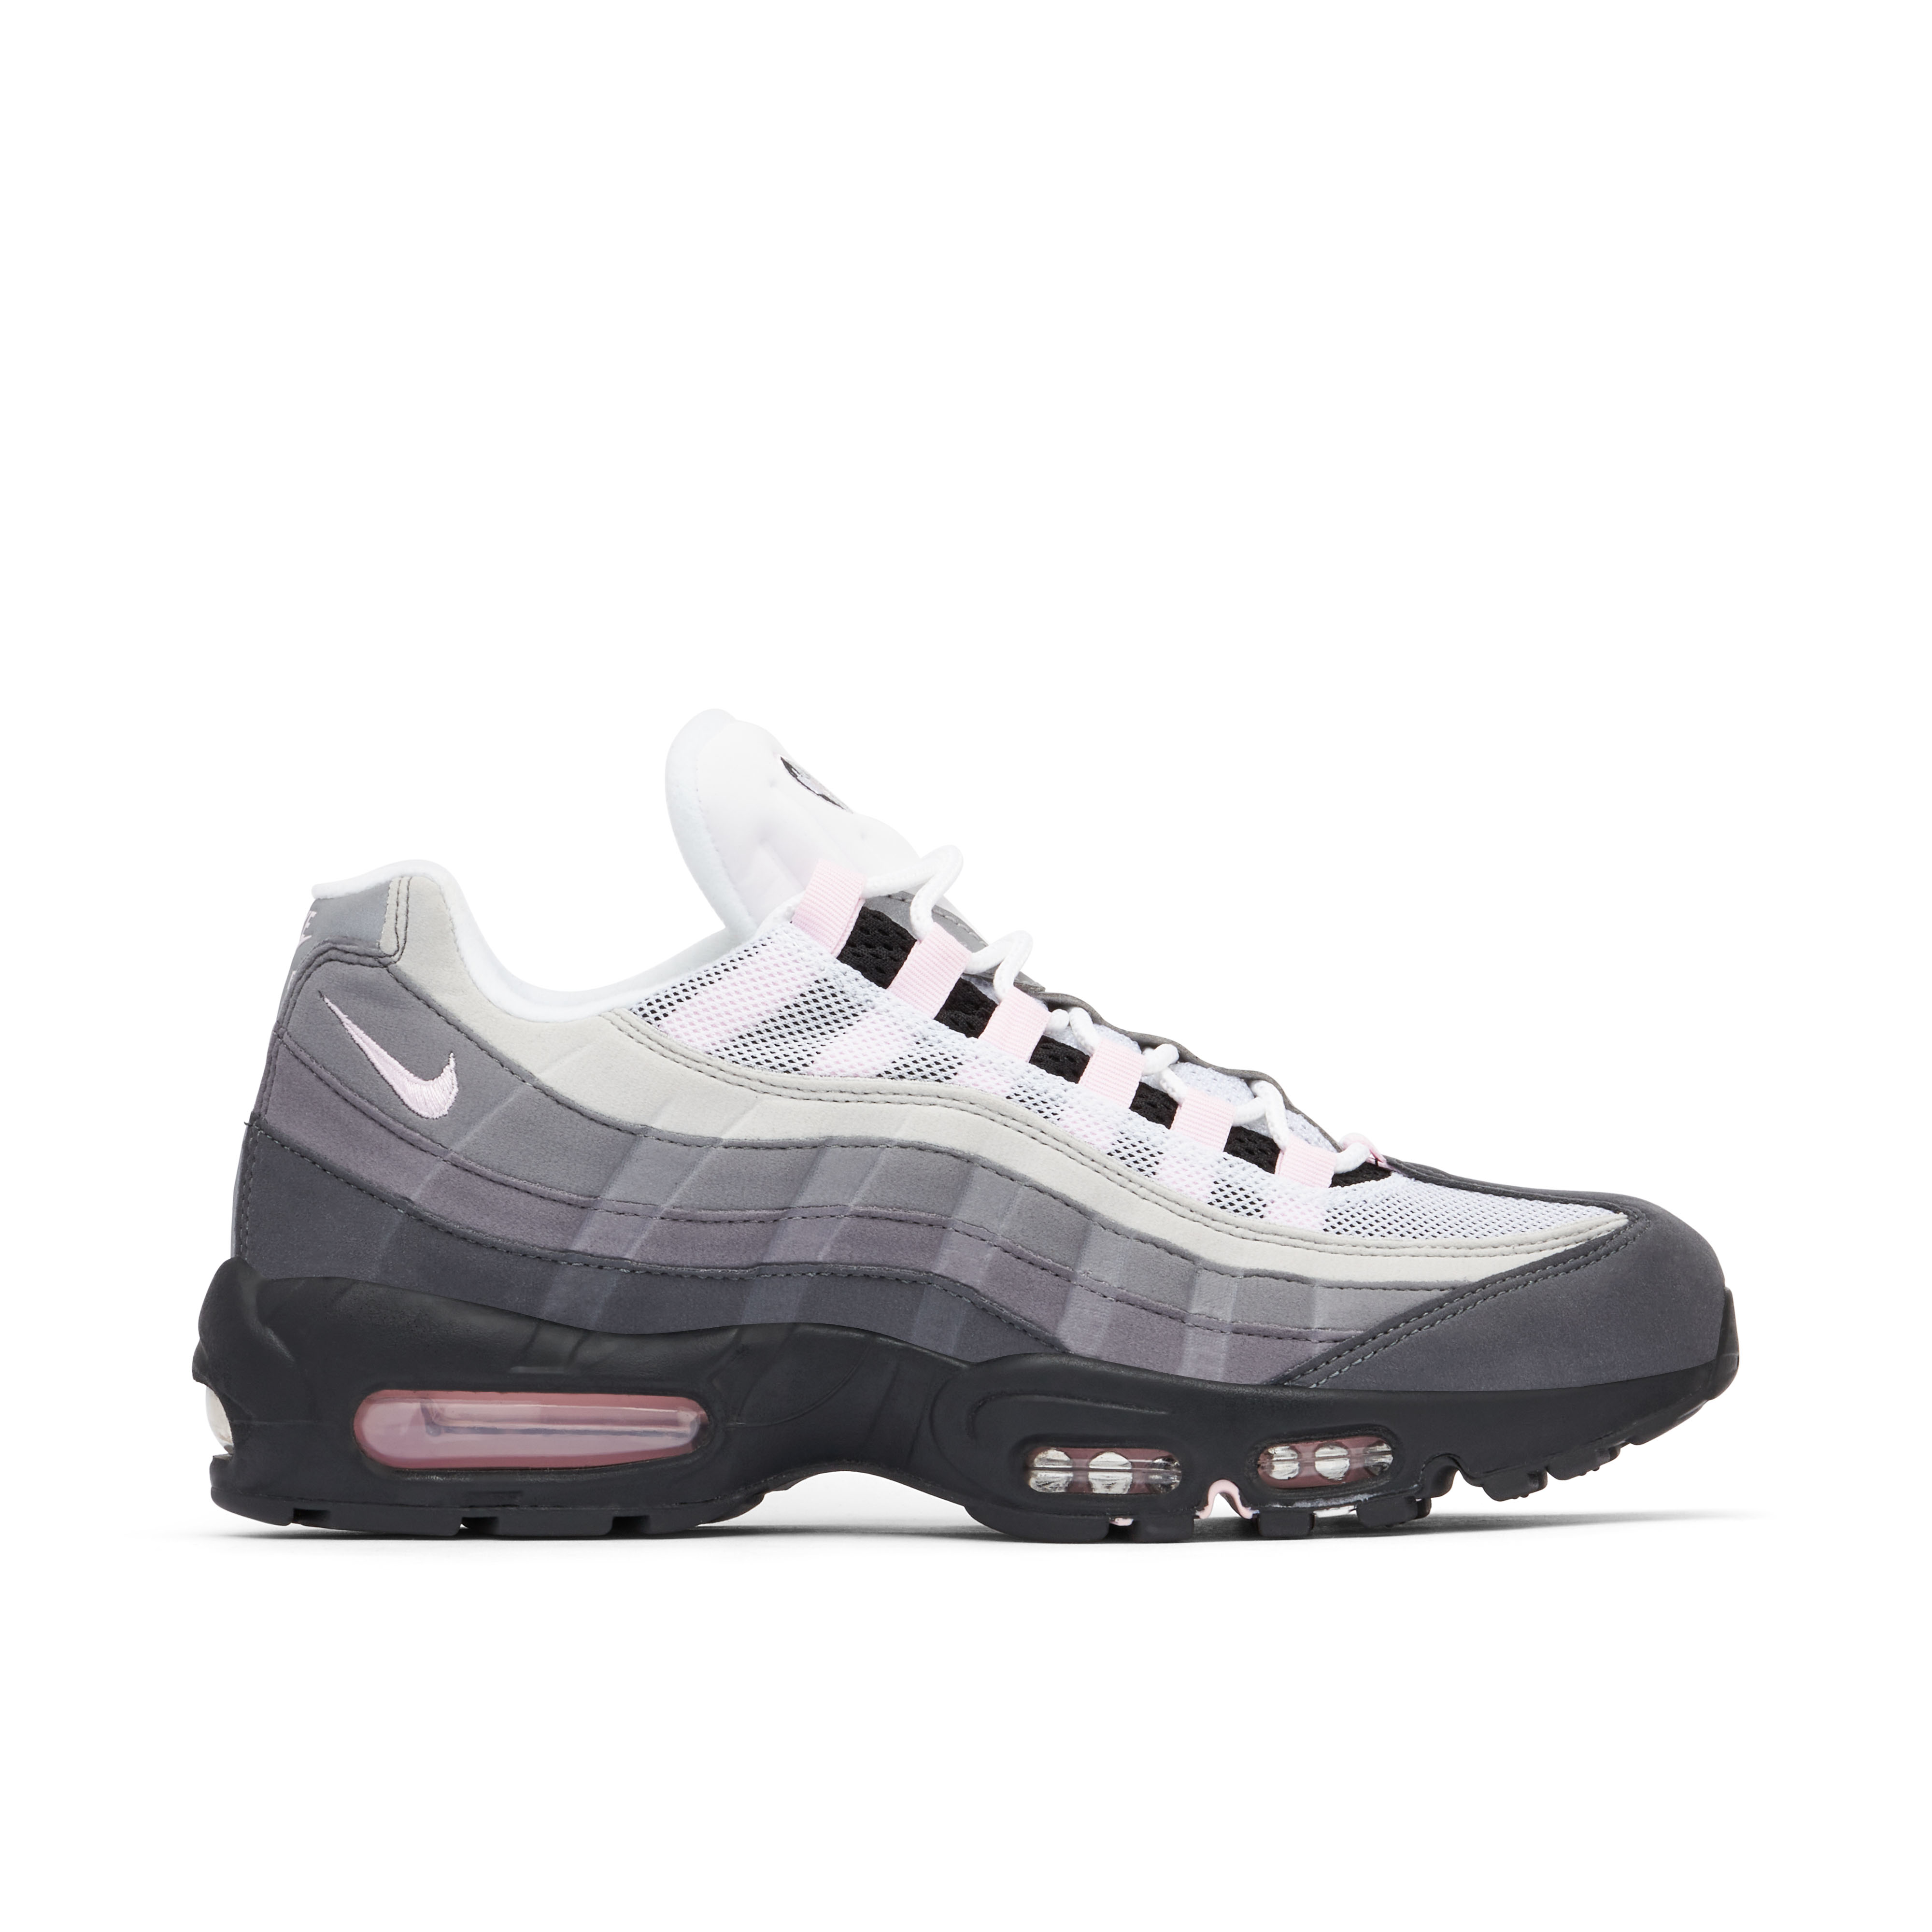 Nike Air Max 95 OG Neon | CT1689-001 | Laced